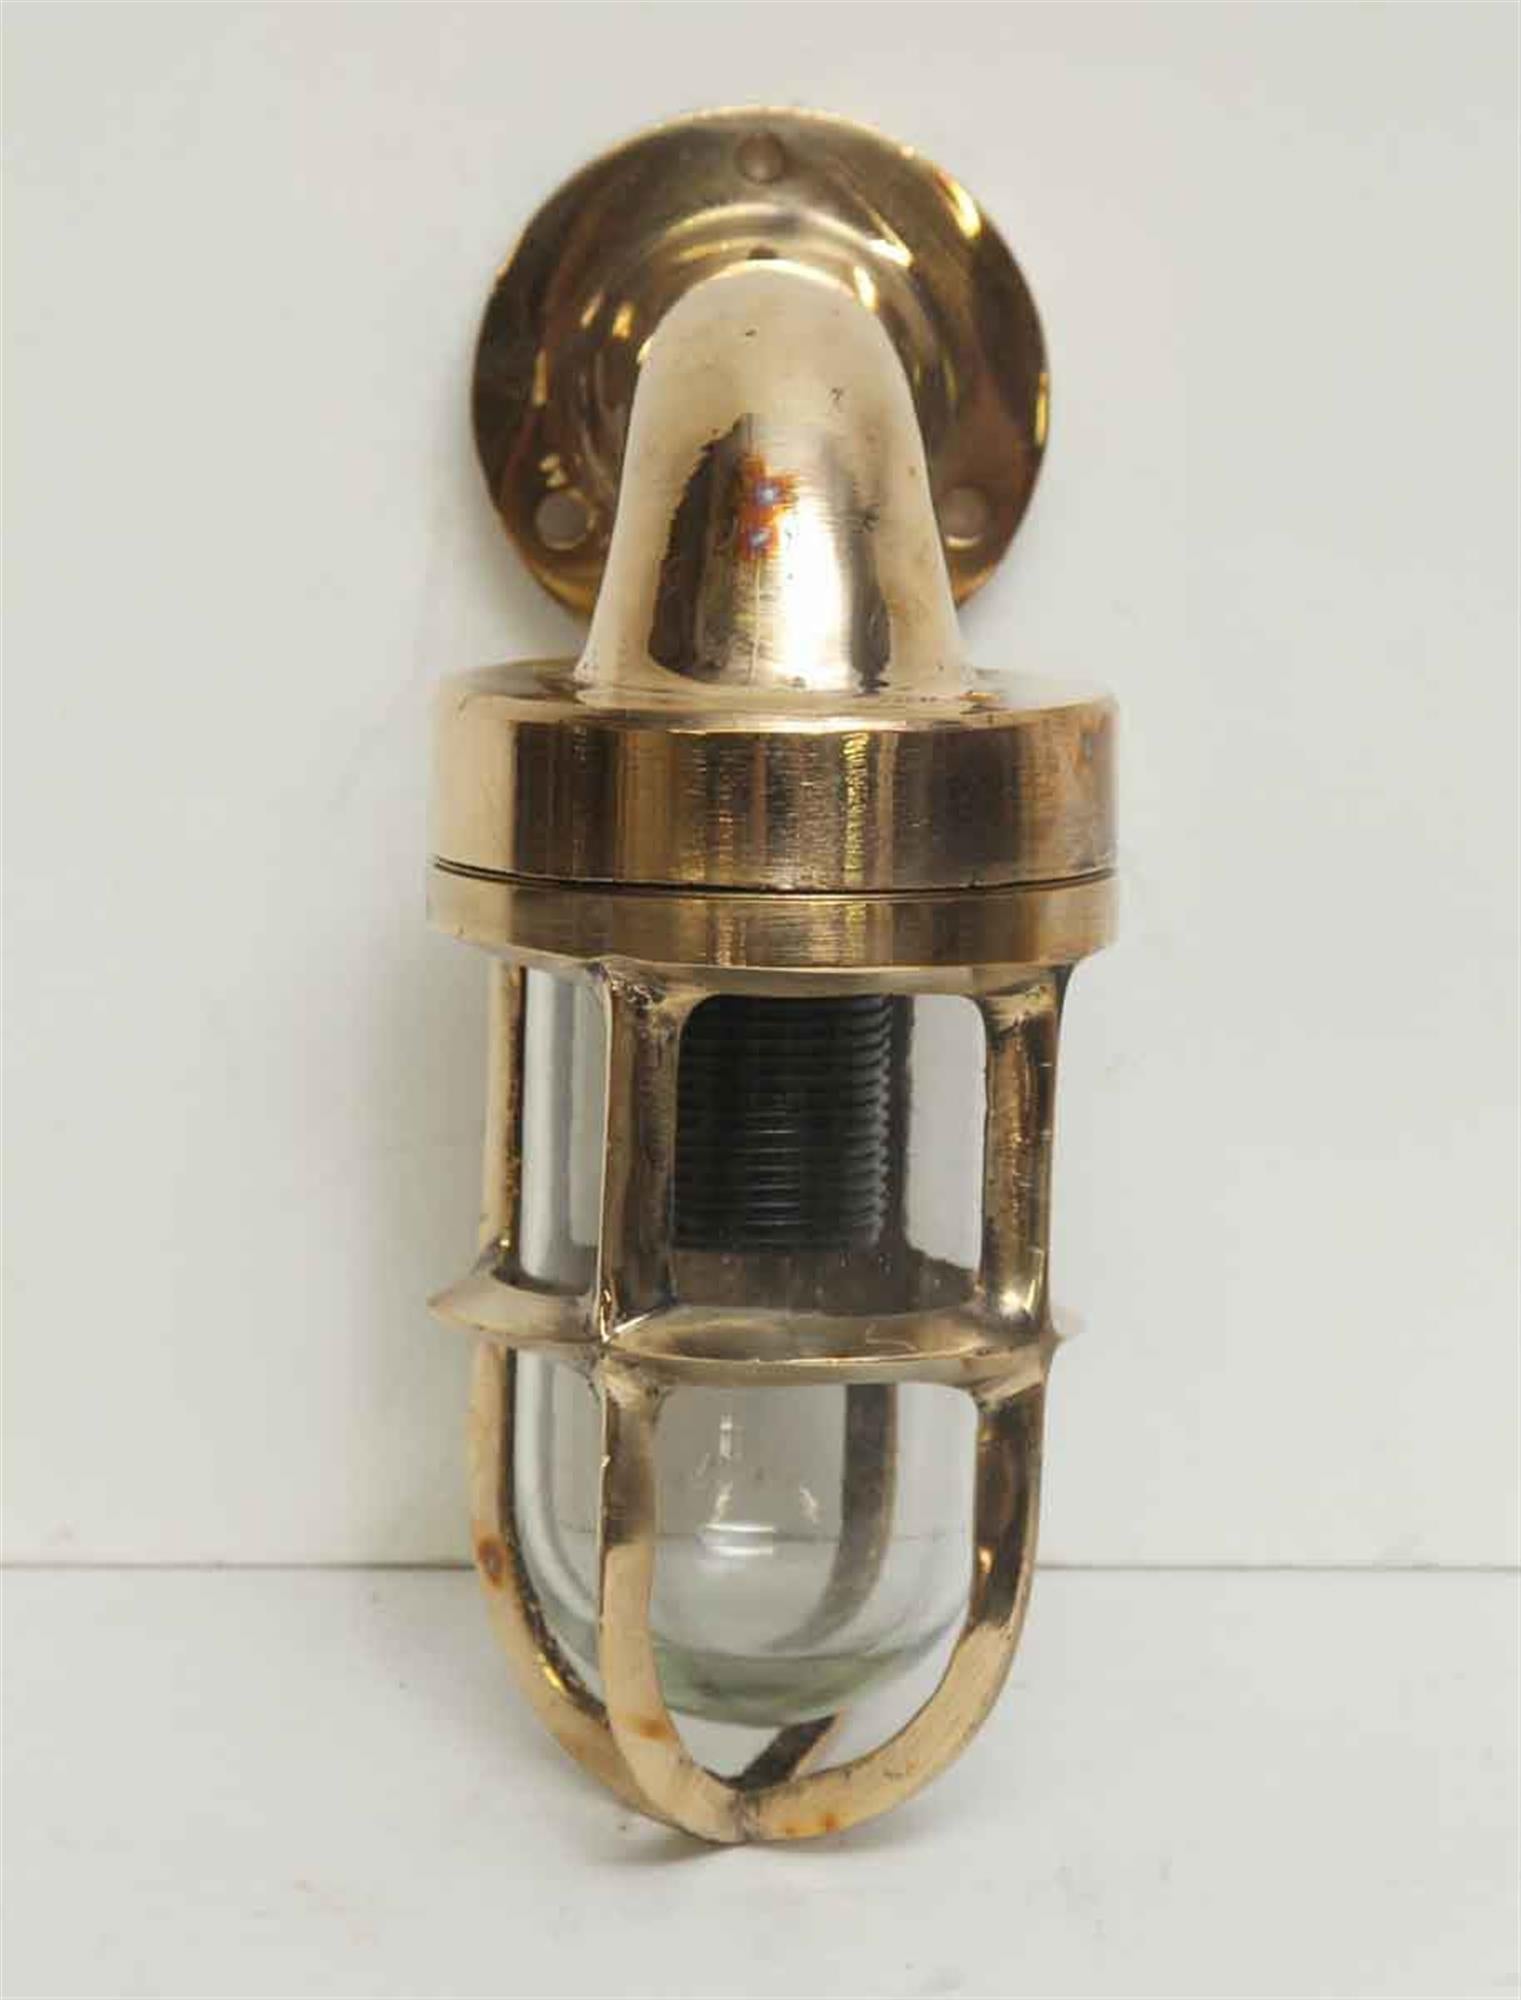 Small 90 degree ship light sconce shown in a brass finish. This light is sold wired and ready to ship. Takes one low wattage candelabra base or kitchen appliance style light bulb. Small quantity available at time of posting. Please inquire. Priced